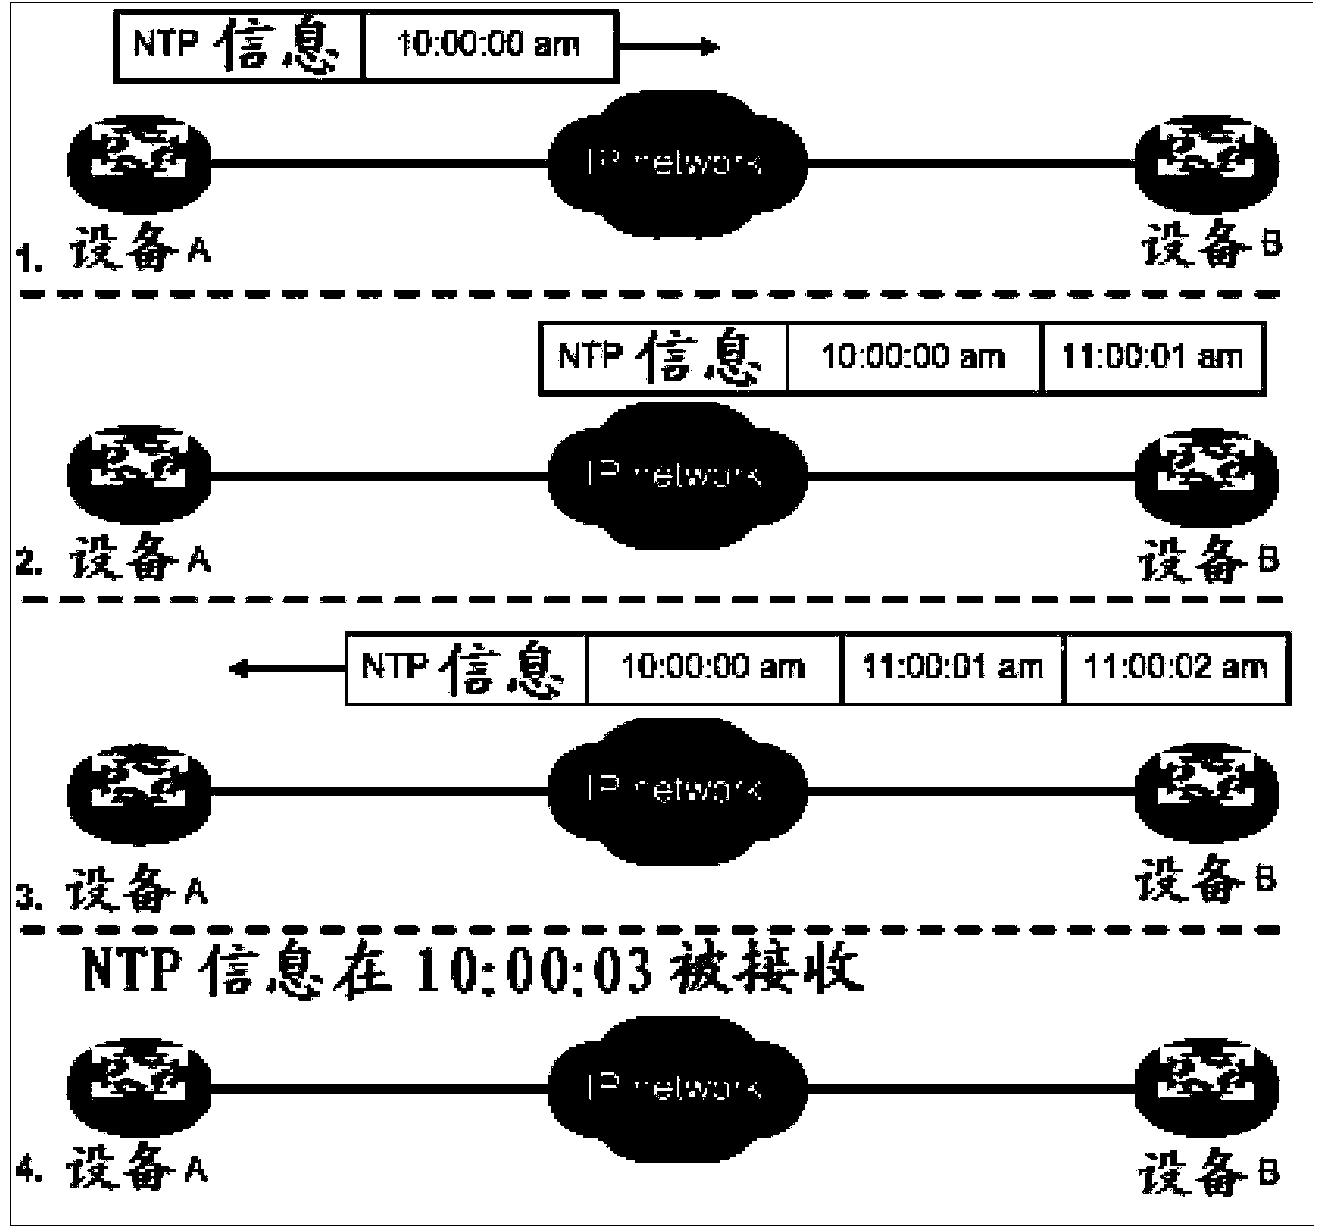 Network time system and method based on Beidou satellite positioning